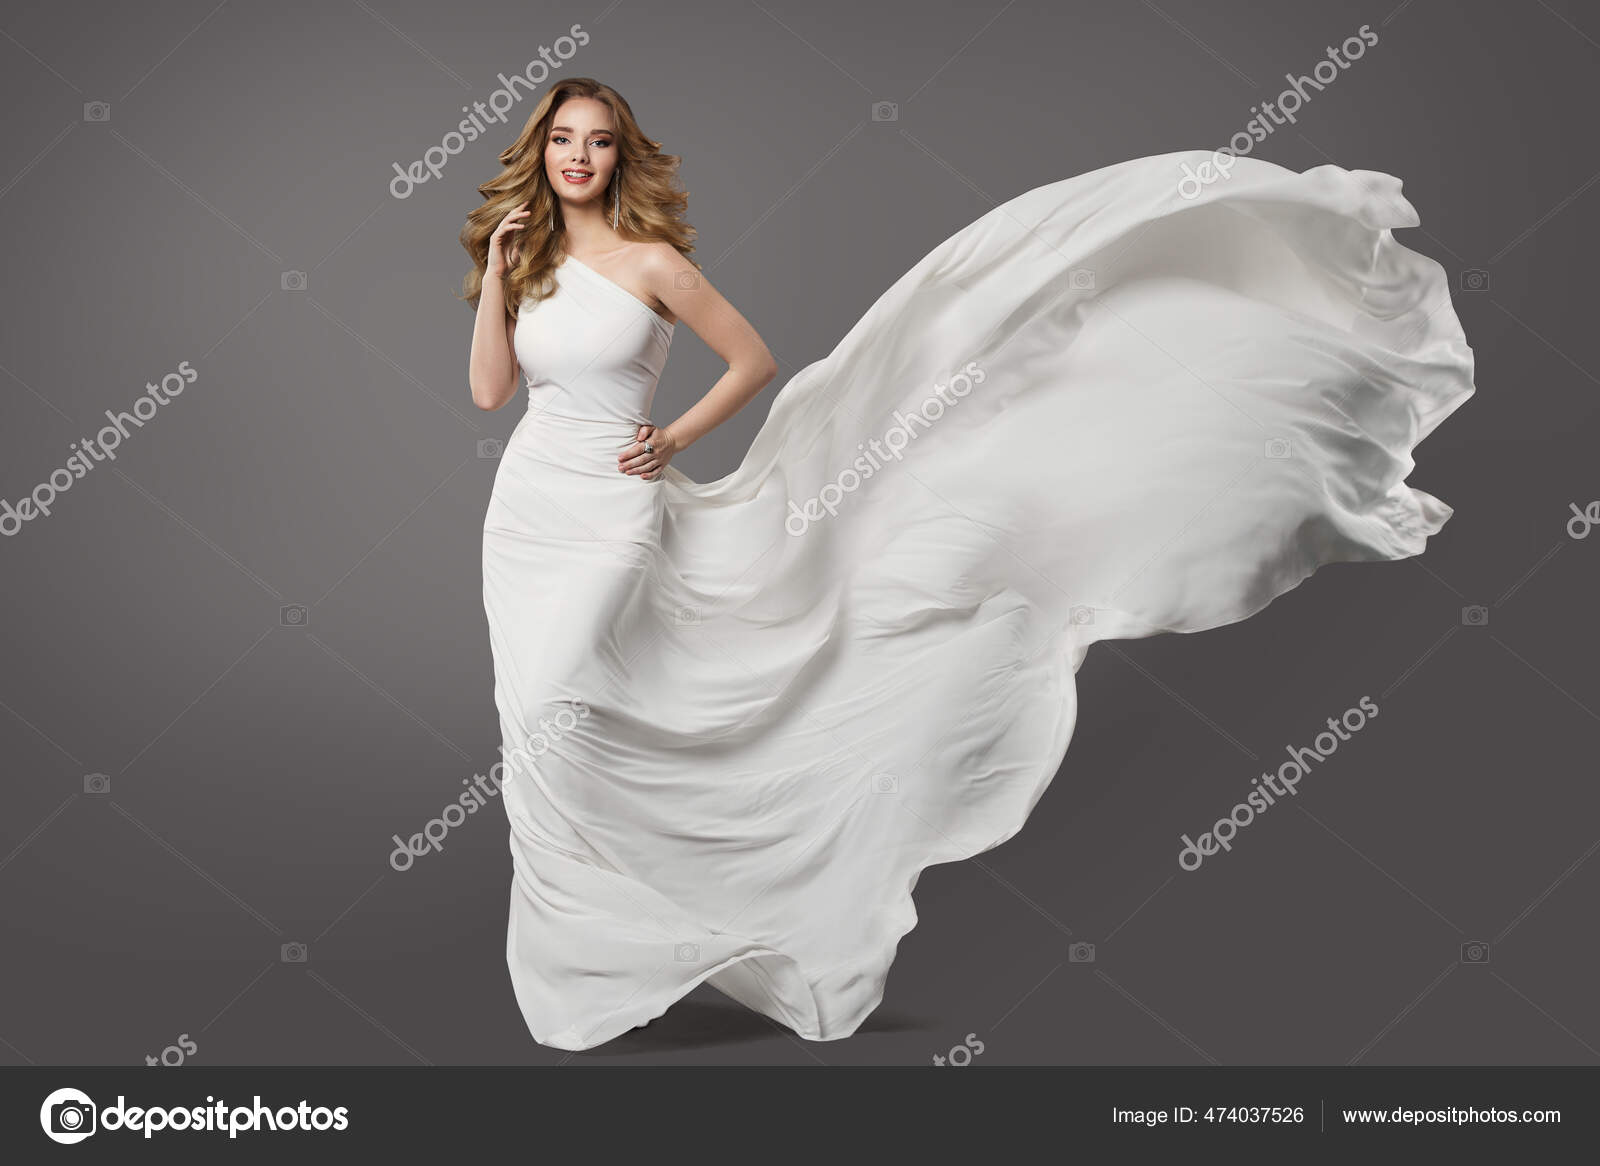 Beauty Model with Curly Hair Style in White Bridal Dress. Bride Fashion  Woman in Wedding Gown Full Length. Makeup and Hairstyle Stock Image - Image  of fashion, fashionable: 219735609